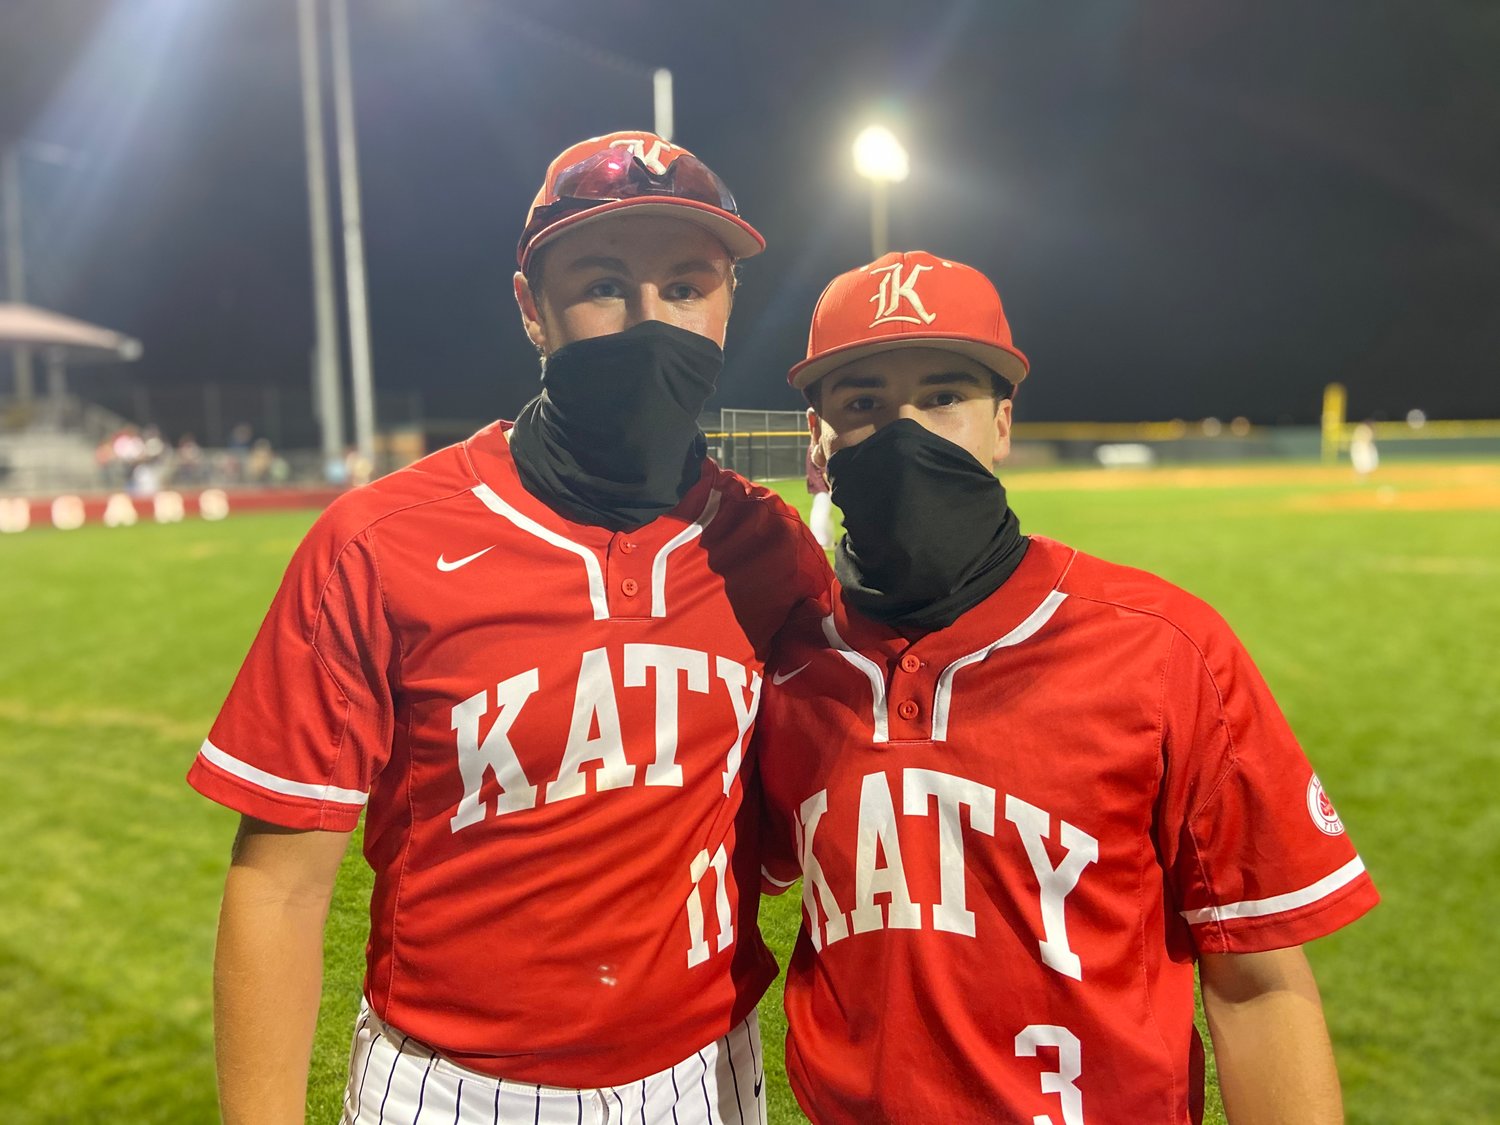 Katy High seniors Ryan Brome, left, and Caleb Matthews, pose for a photo after a 6-2 win over Cinco Ranch on Tuesday, March 16, at Cinco Ranch High.